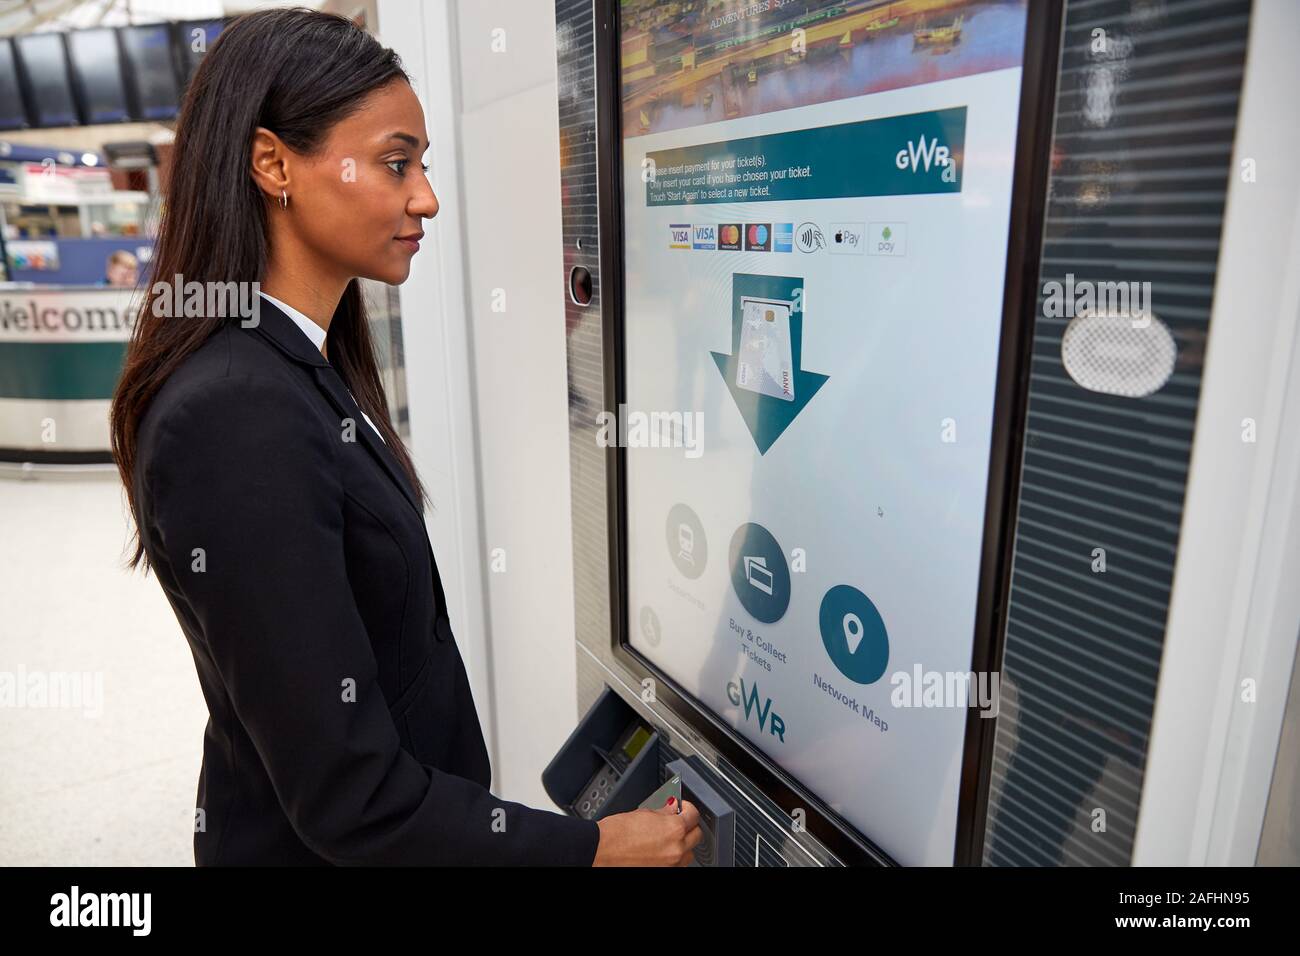 Businesswoman Commuting To Work Buying Train Ticket From Self Service Machine Stock Photo